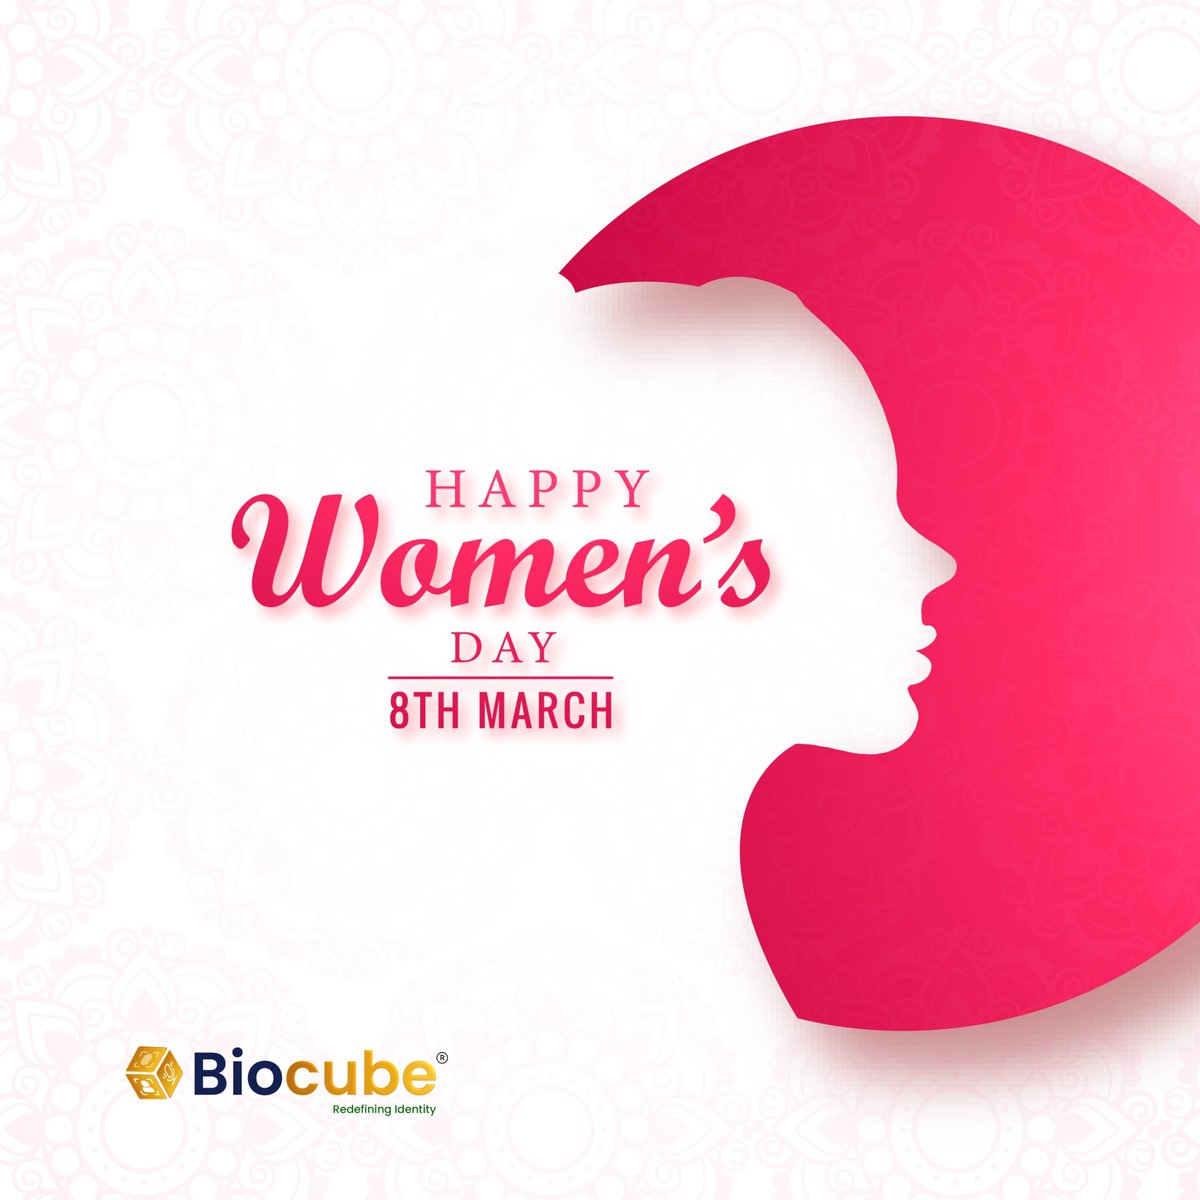 Wishing you a fantastic Women's Day filled with love, empowerment, and inspiration. You all deserve all the recognition and appreciation today and every day. Happy Women's Day🎊 Team, @Biocube_AI #WomensDay #Empowerment #Strength #Equality #WomenLeaders #CelebrateWomen